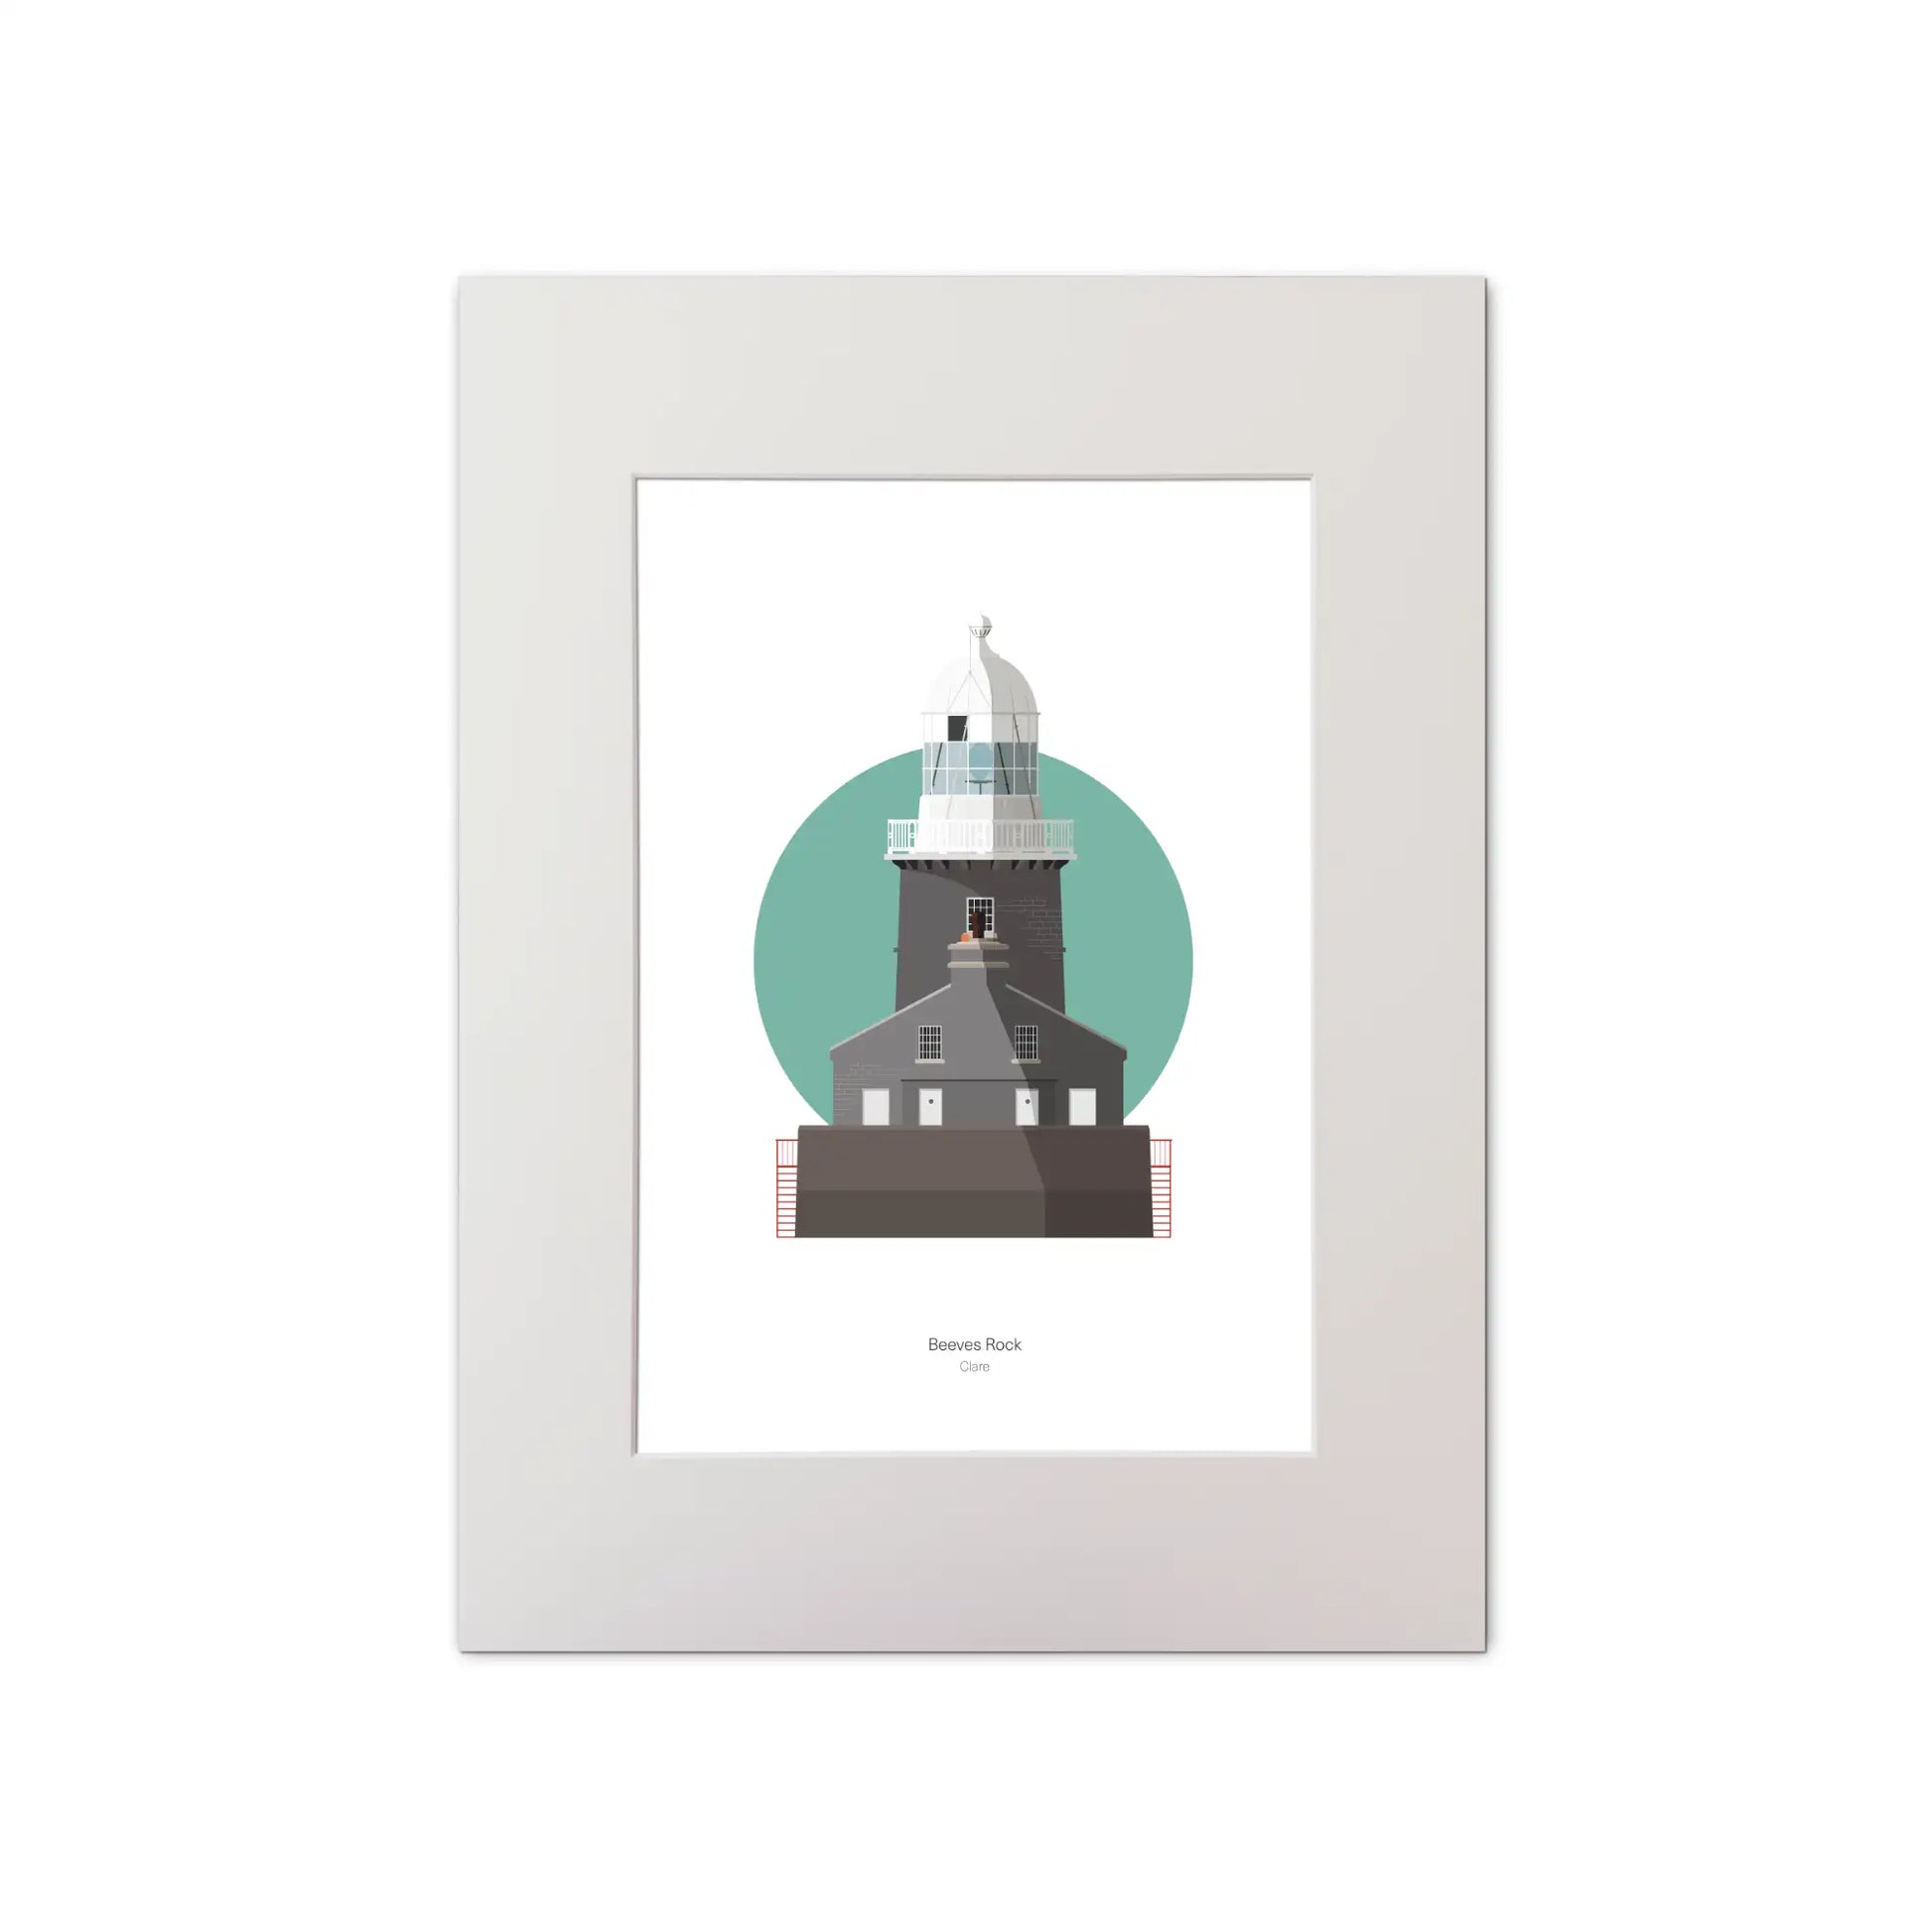 Illustration of Beeves Rock lighthouse on a white background inside light blue square, mounted and measuring 30x40cm.